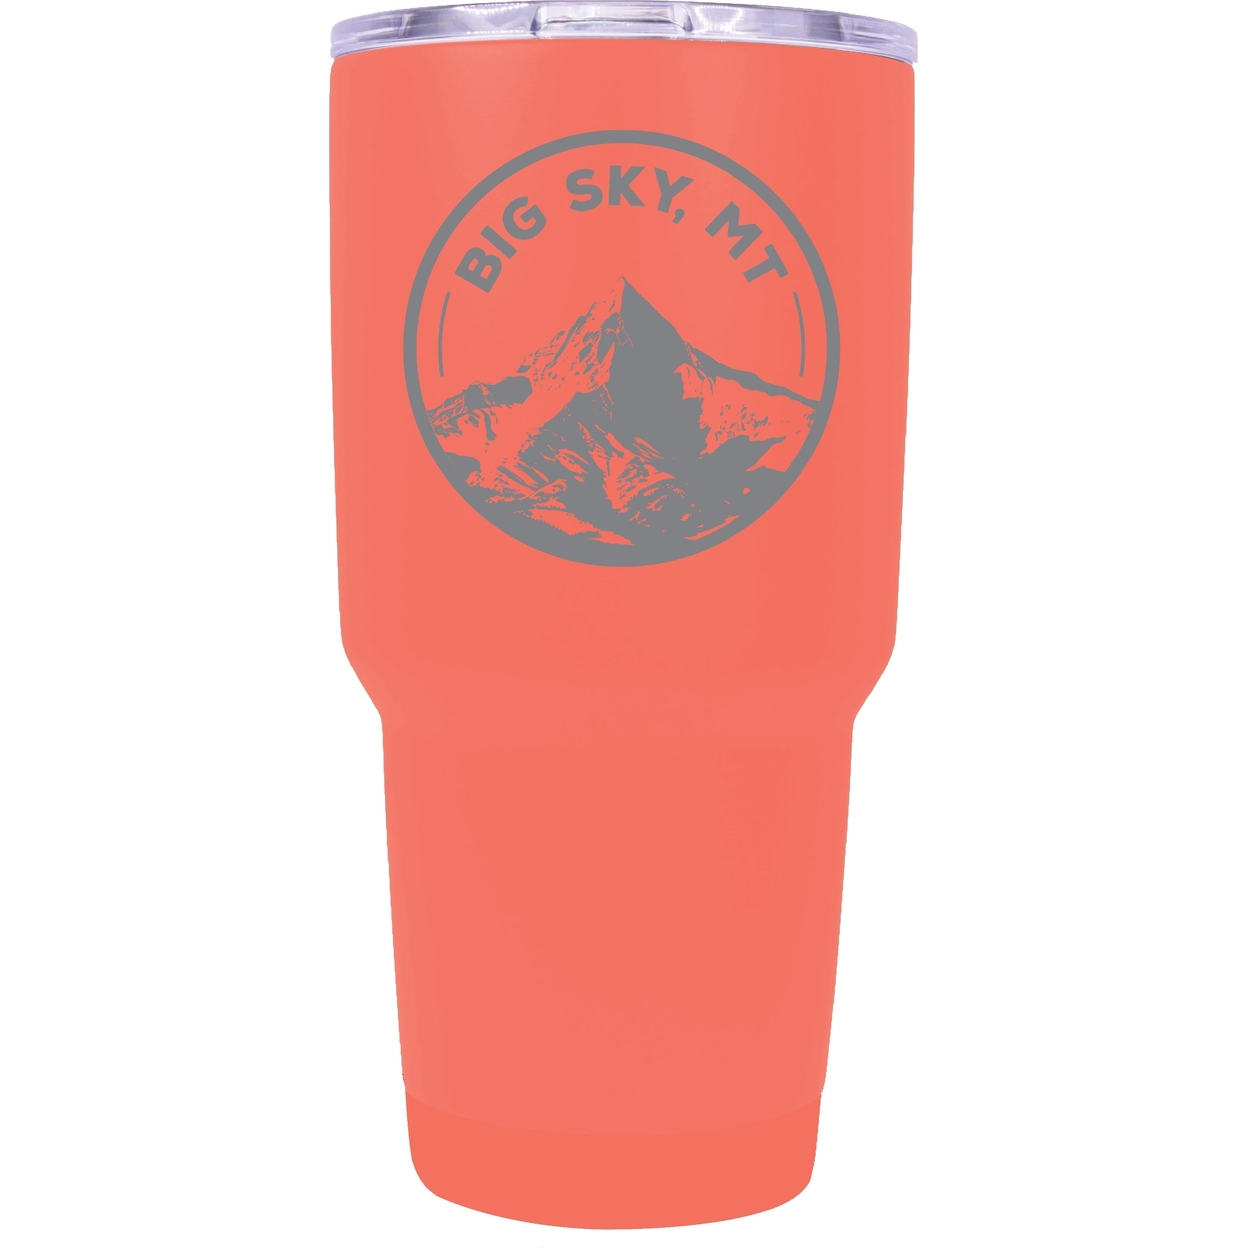 Big Sky Montana Souvenir 24 Oz Engraved Insulated Stainless Steel Tumbler - Coral,,Single Unit